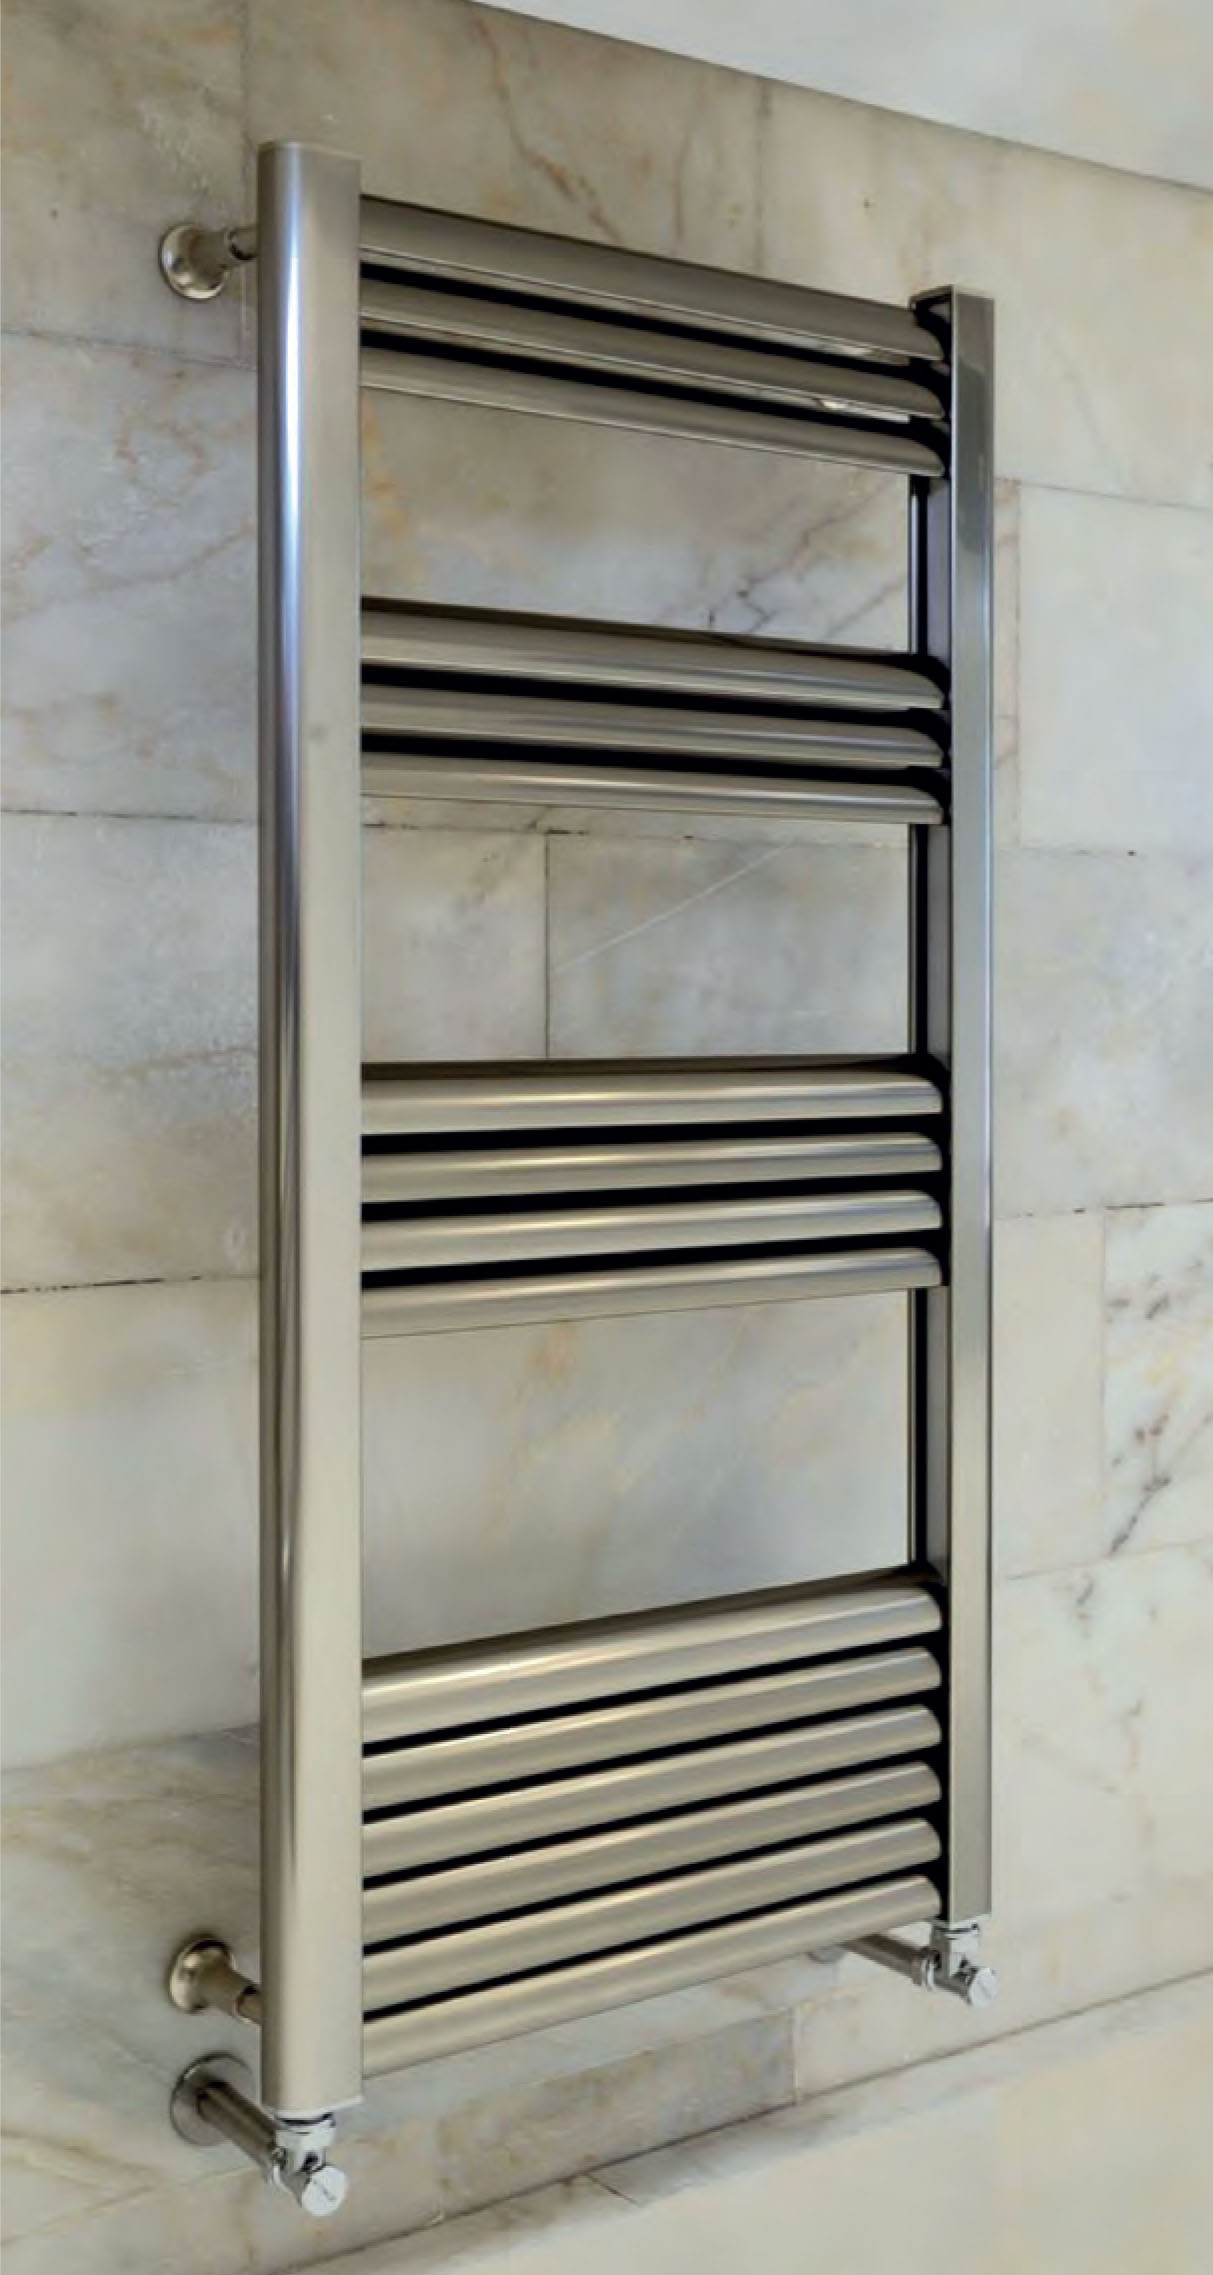 Save Space at Home With Careful Design & Compact Radiators and Towel Rails